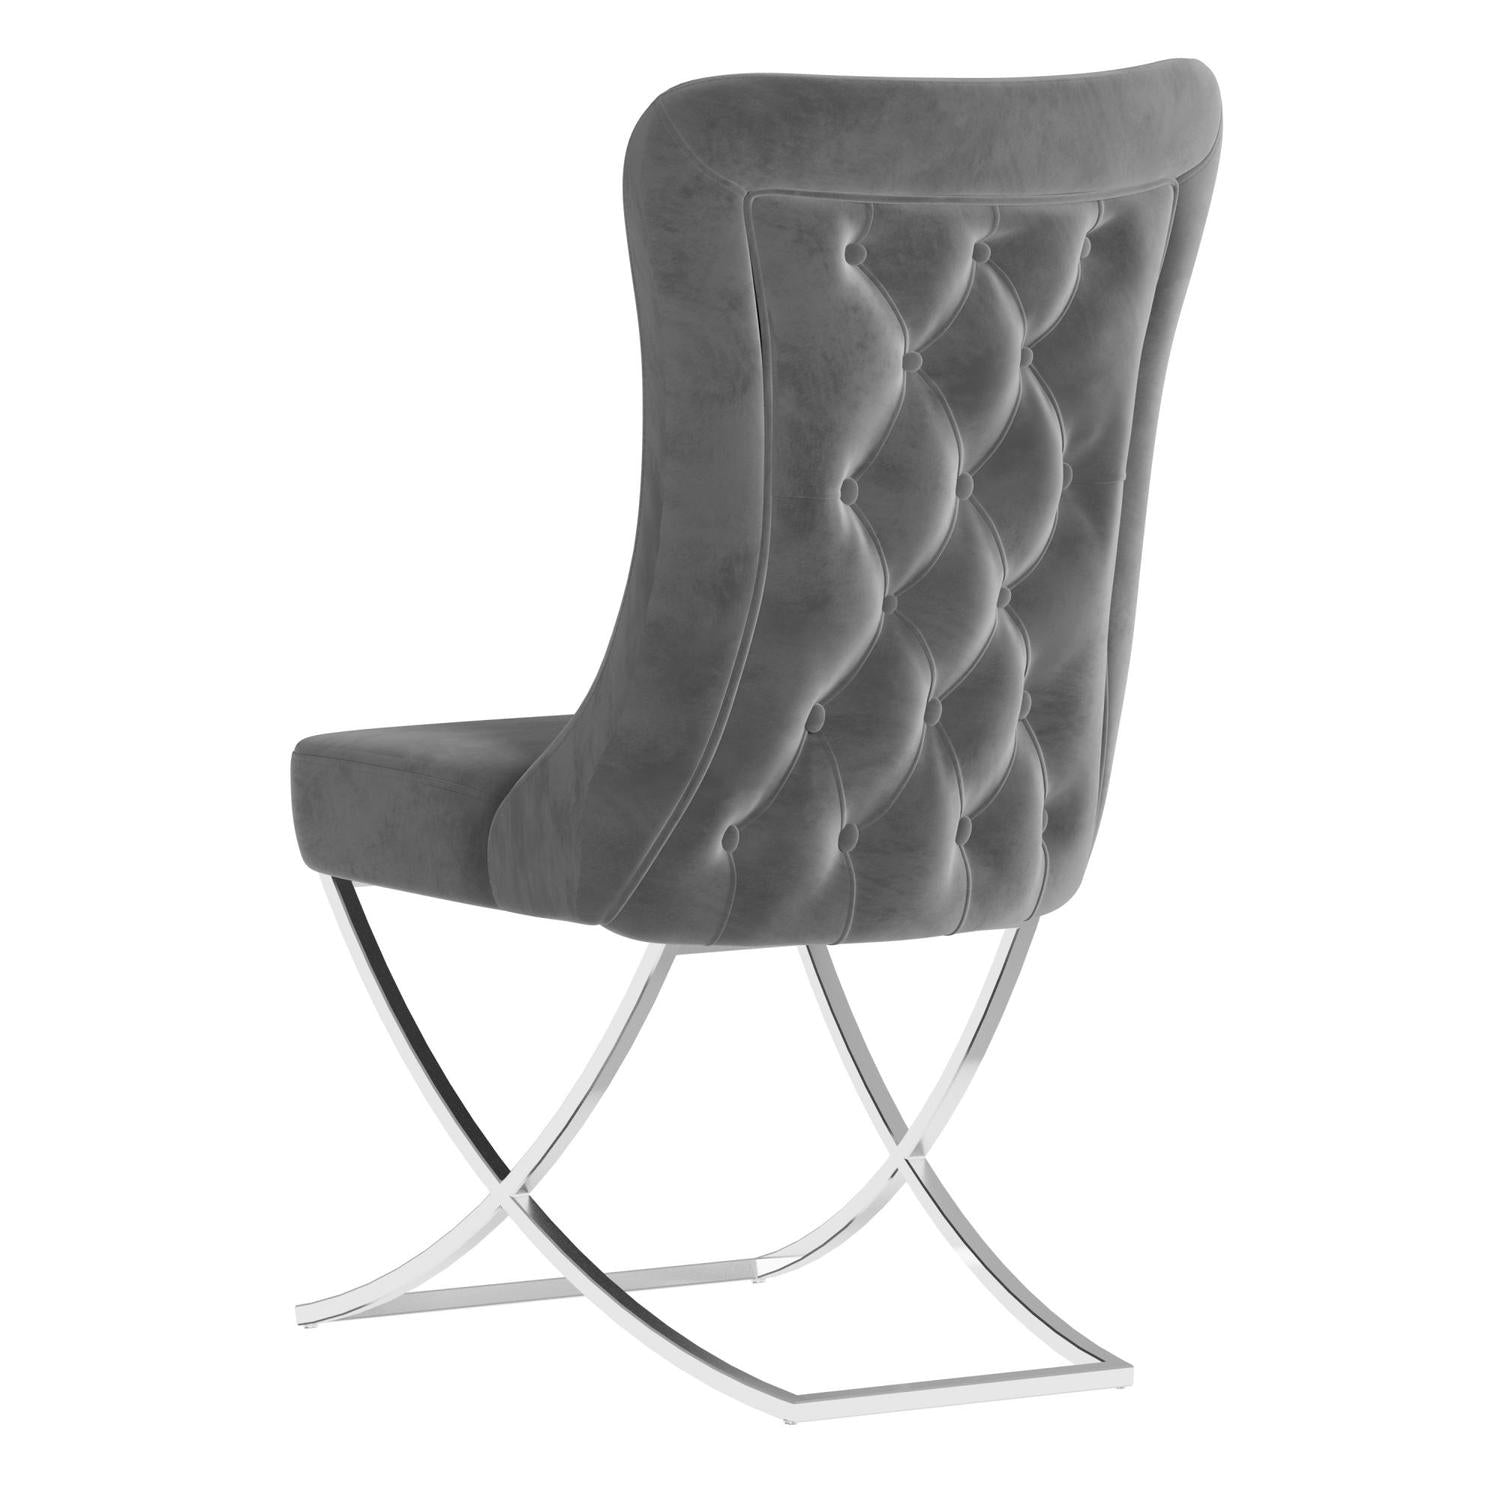 Sultan Collection Wing Back, Modern design, upholstered dining chair in Charcoal Gray with Silver Metal legs in white background the back view.